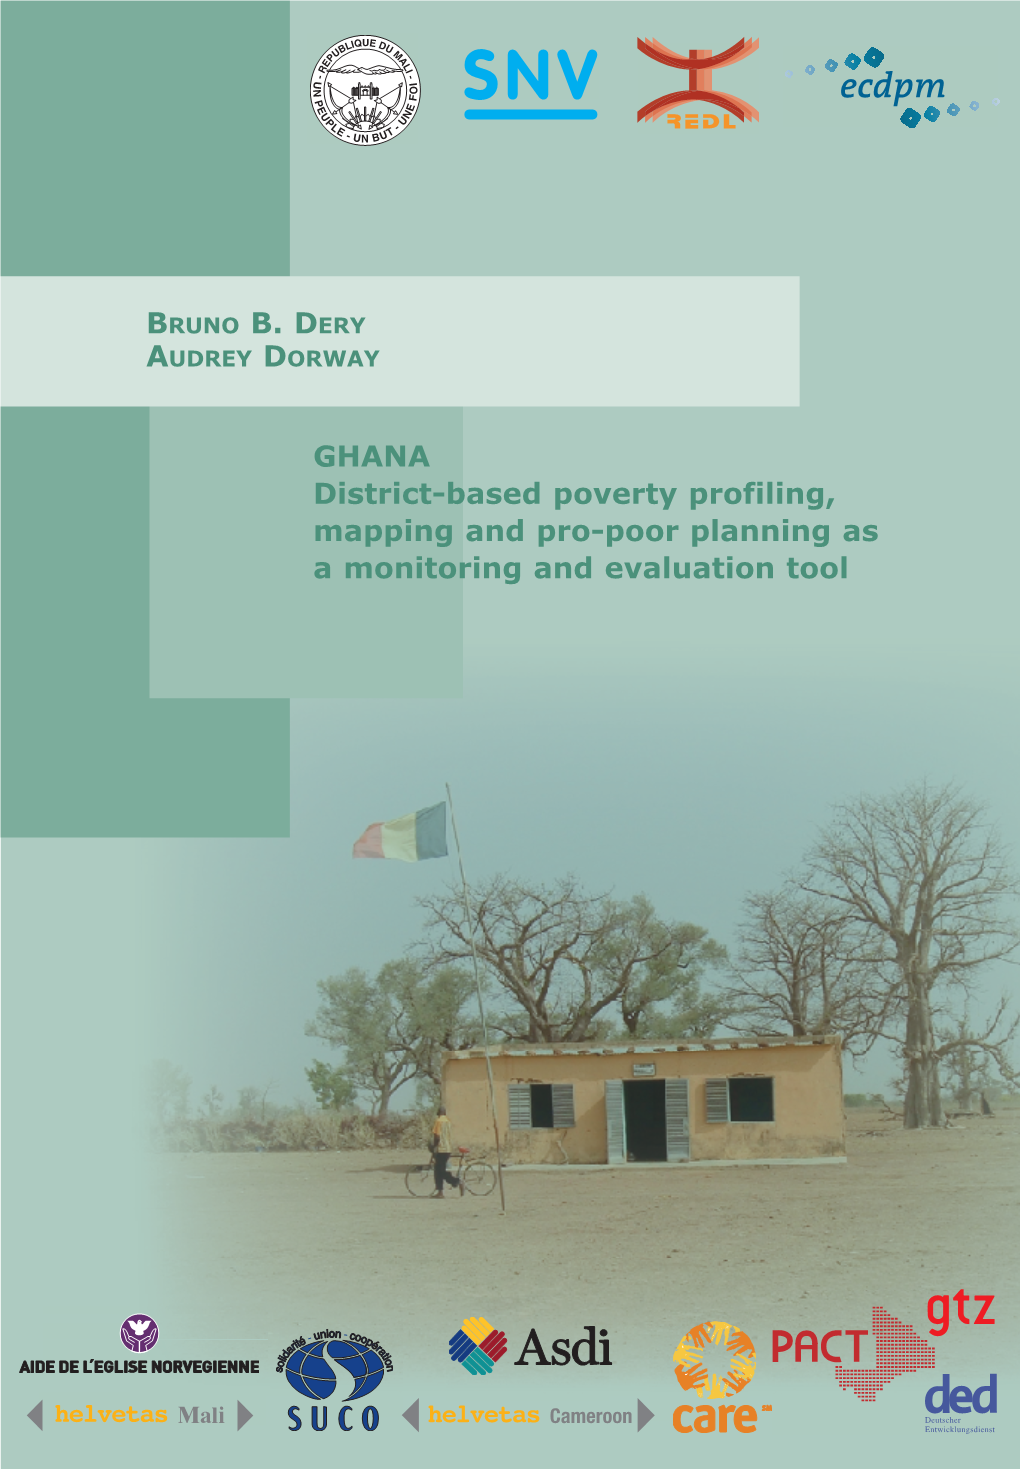 GHANA District-Based Poverty Profiling, Mapping and Pro-Poor Planning As a Monitoring and Evaluation Tool